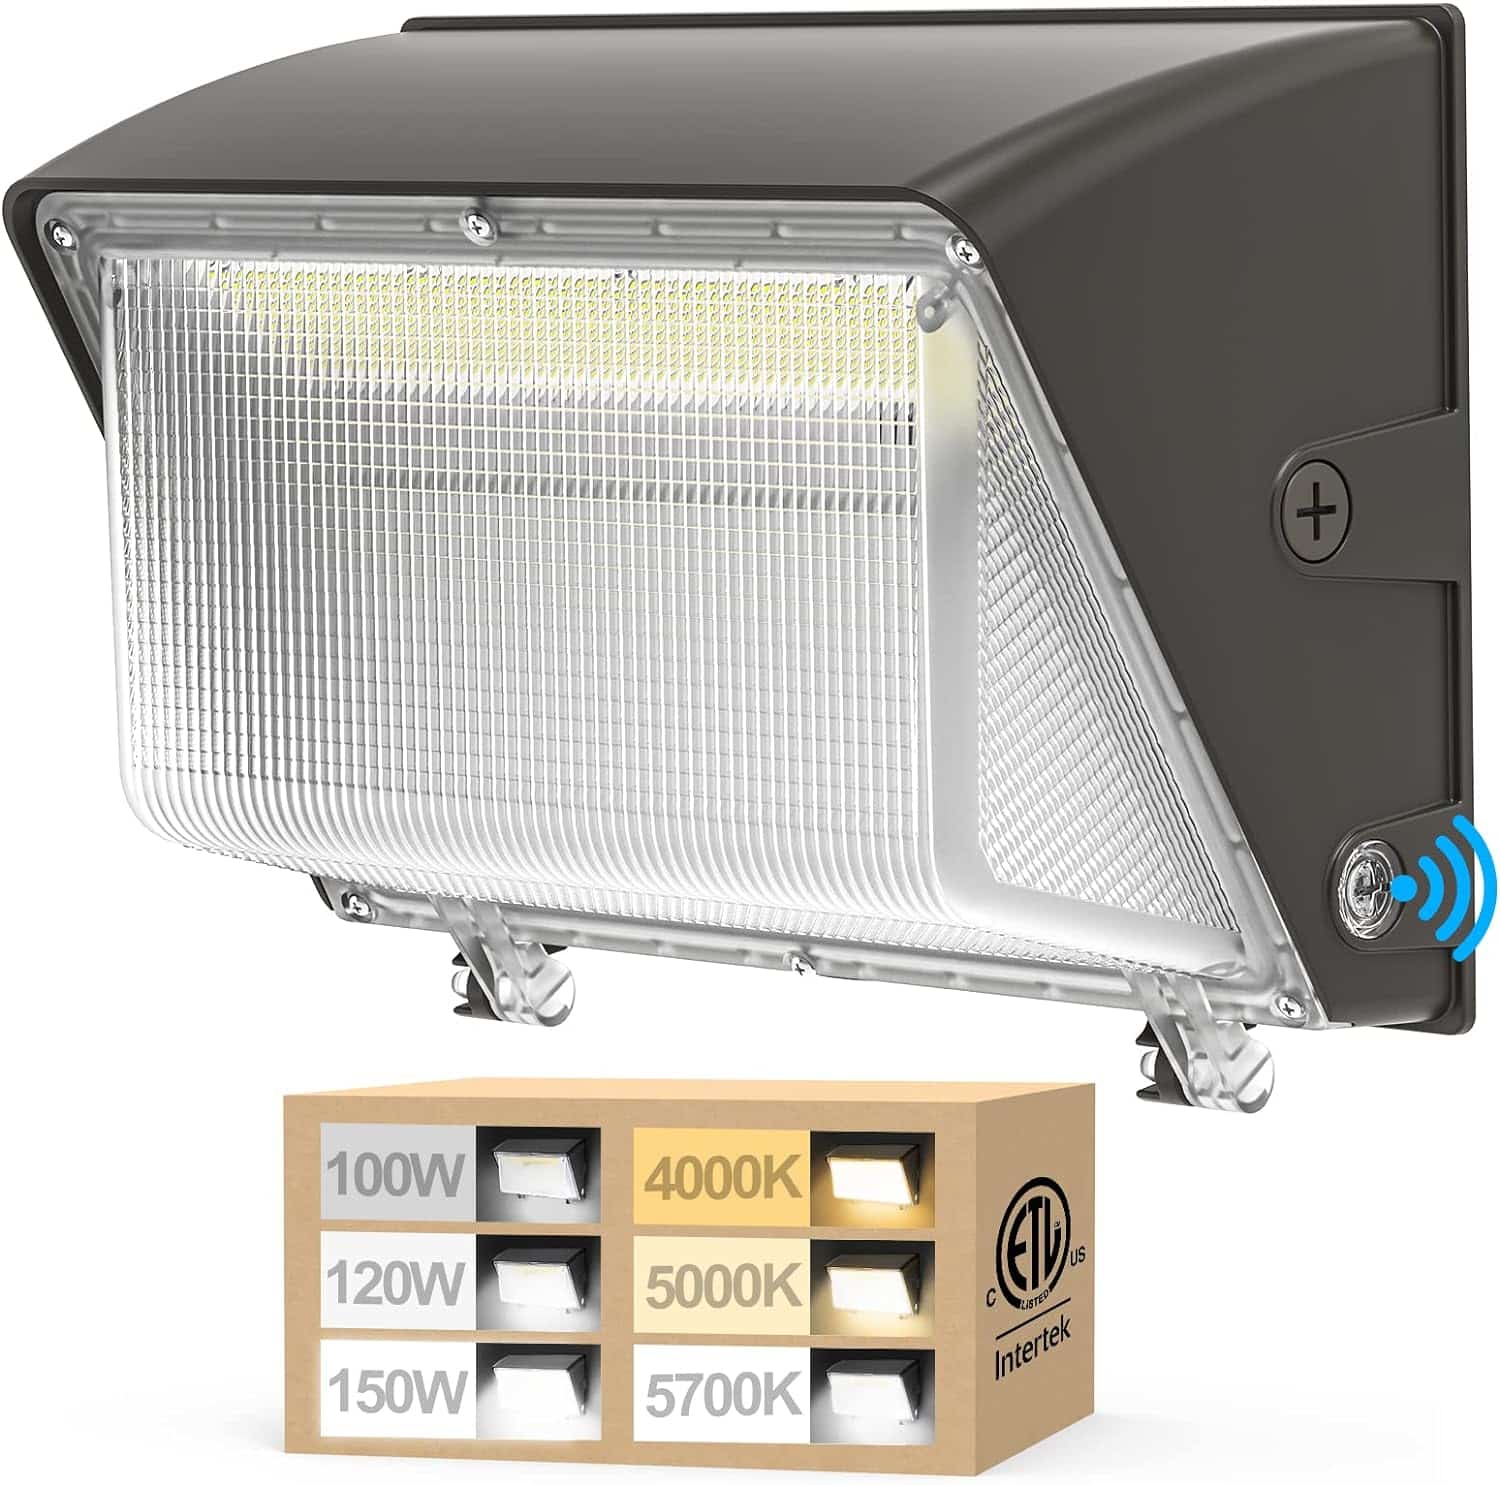 YARBO 9-in-1 150W LED Wall Pack Light 120W 100W Switchable, 3 Color Selectable LED Wall Pack with Photocell, 22500LM [Eqv. 1000W MH], Waterproof Wall Pack Lights Outdoor LED for Warehouse, ETL Listed